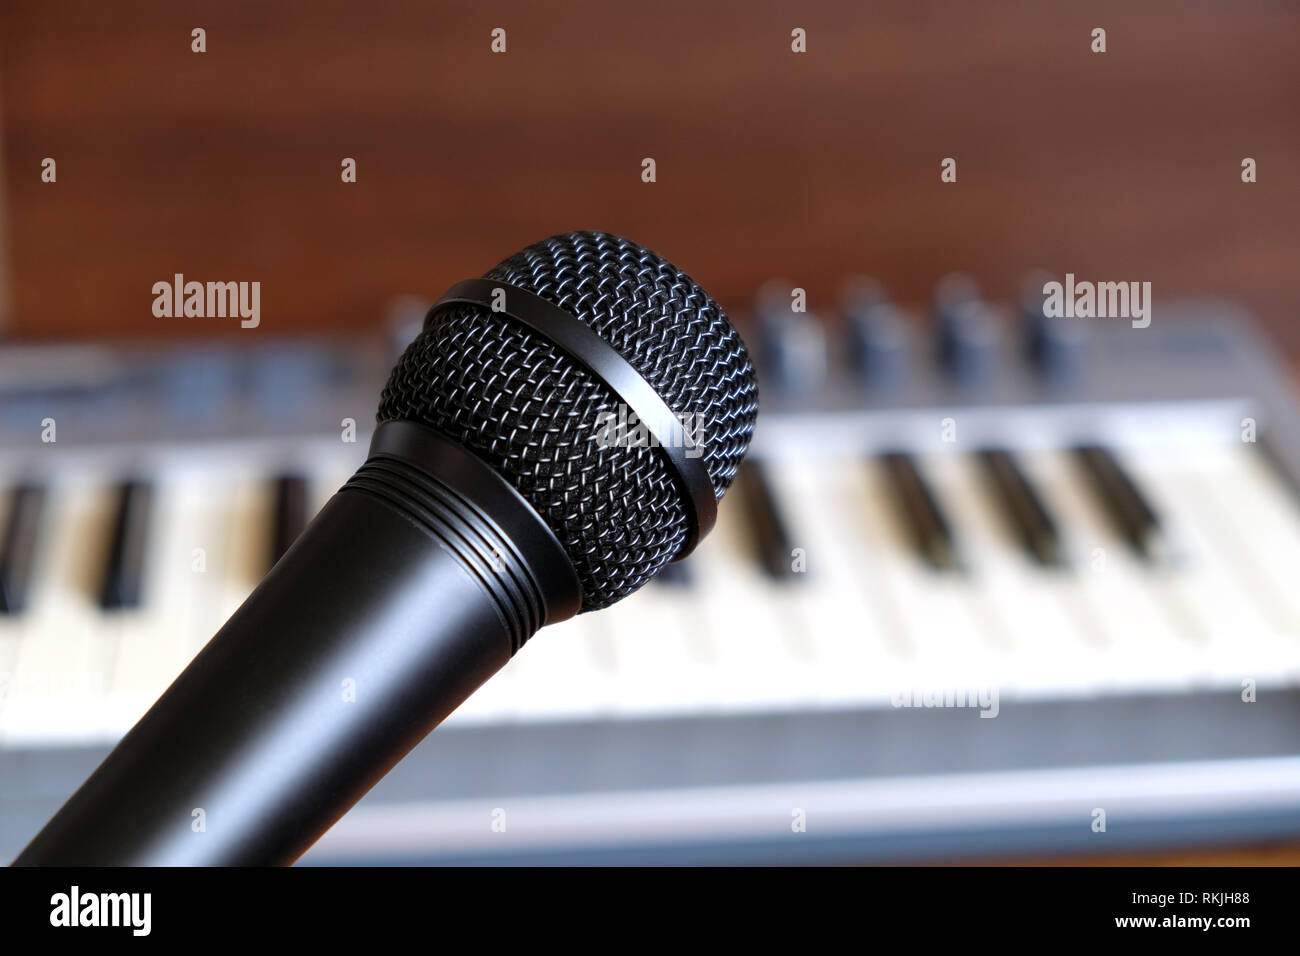 Black vocal microphone close up against defocus electronic synthesizer keyboard with many control knobs in silver plastic body as background Stock Photo